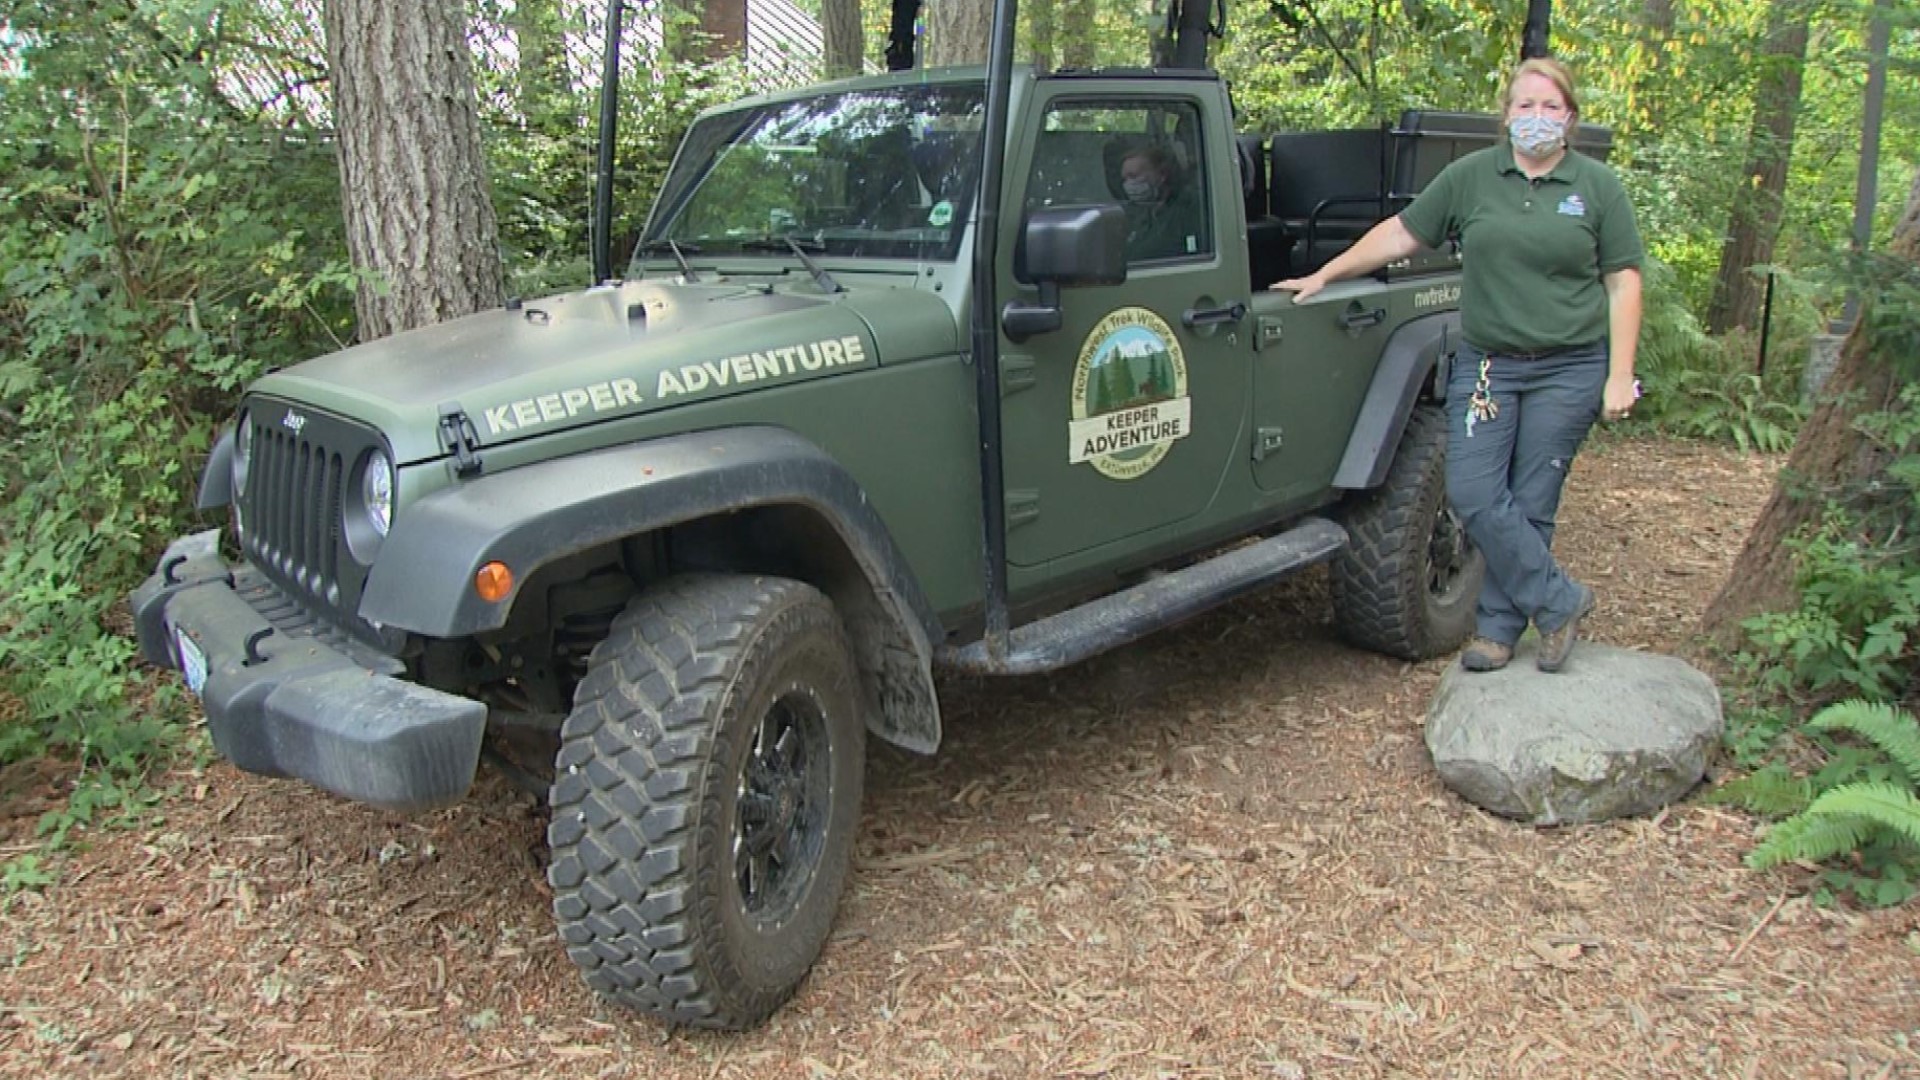 The Keeper Adventure Tours at Northwest Trek are back with extra safety precautions. #k5evening